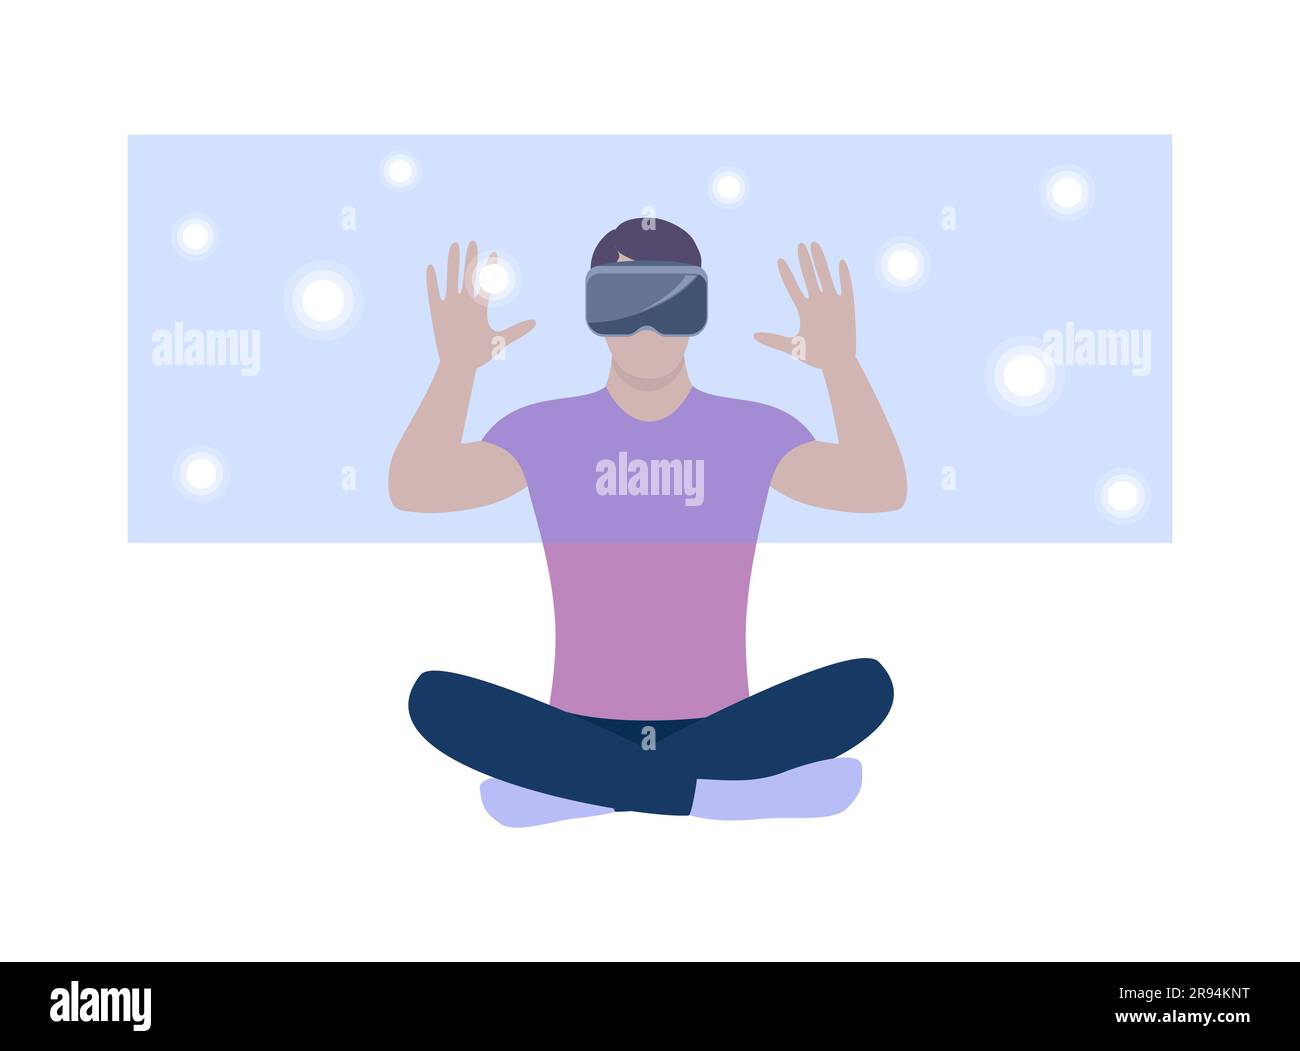 A man in virtual reality glasses sits in a lotus position in front of a translucent blue screen with abstract circles. The concept of virtual technolo Stock Vector